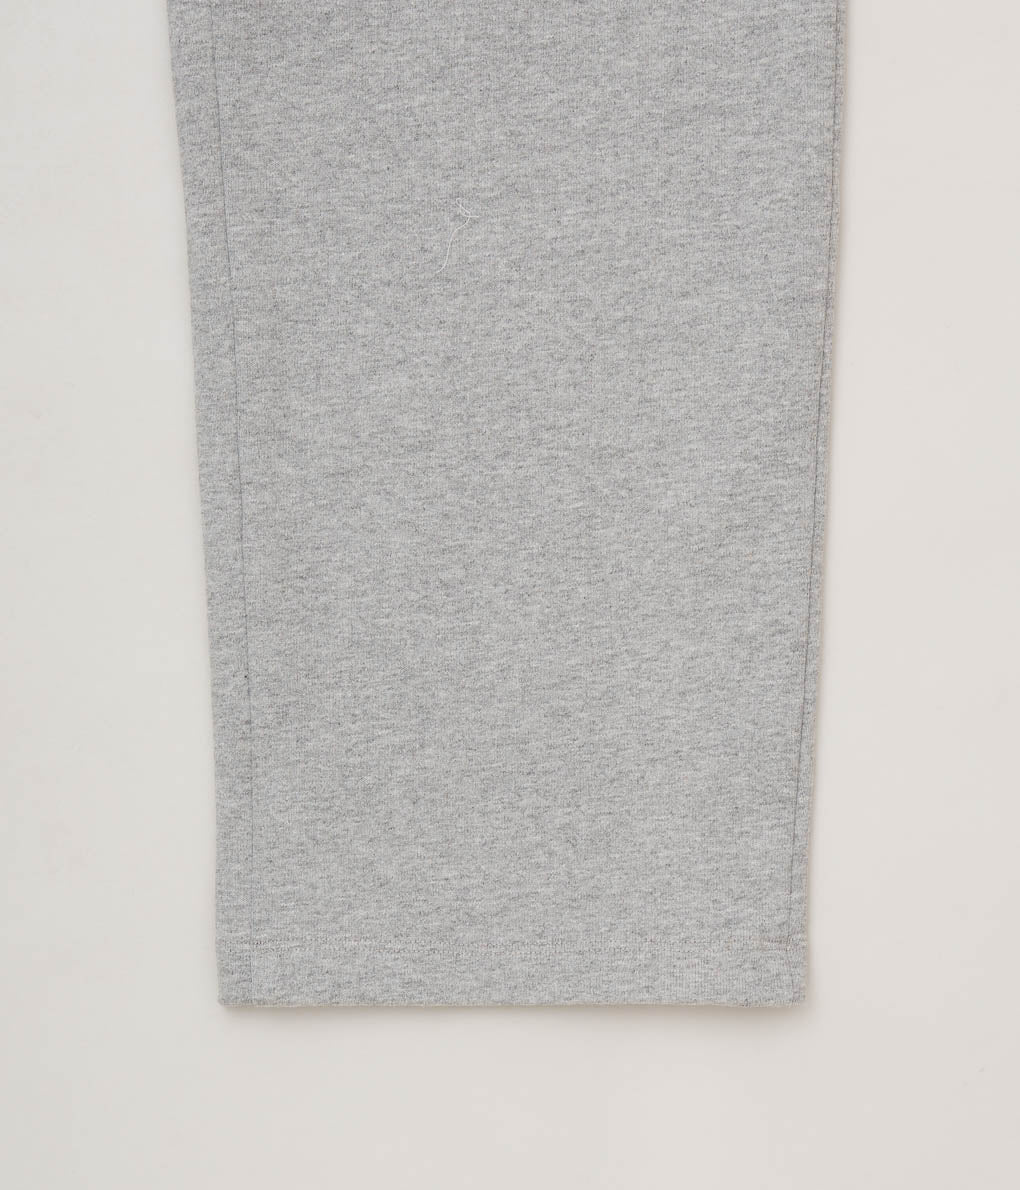 CARTER YOUNG ''PLEATED SWEATPANTS'' (HEATHER GREY)